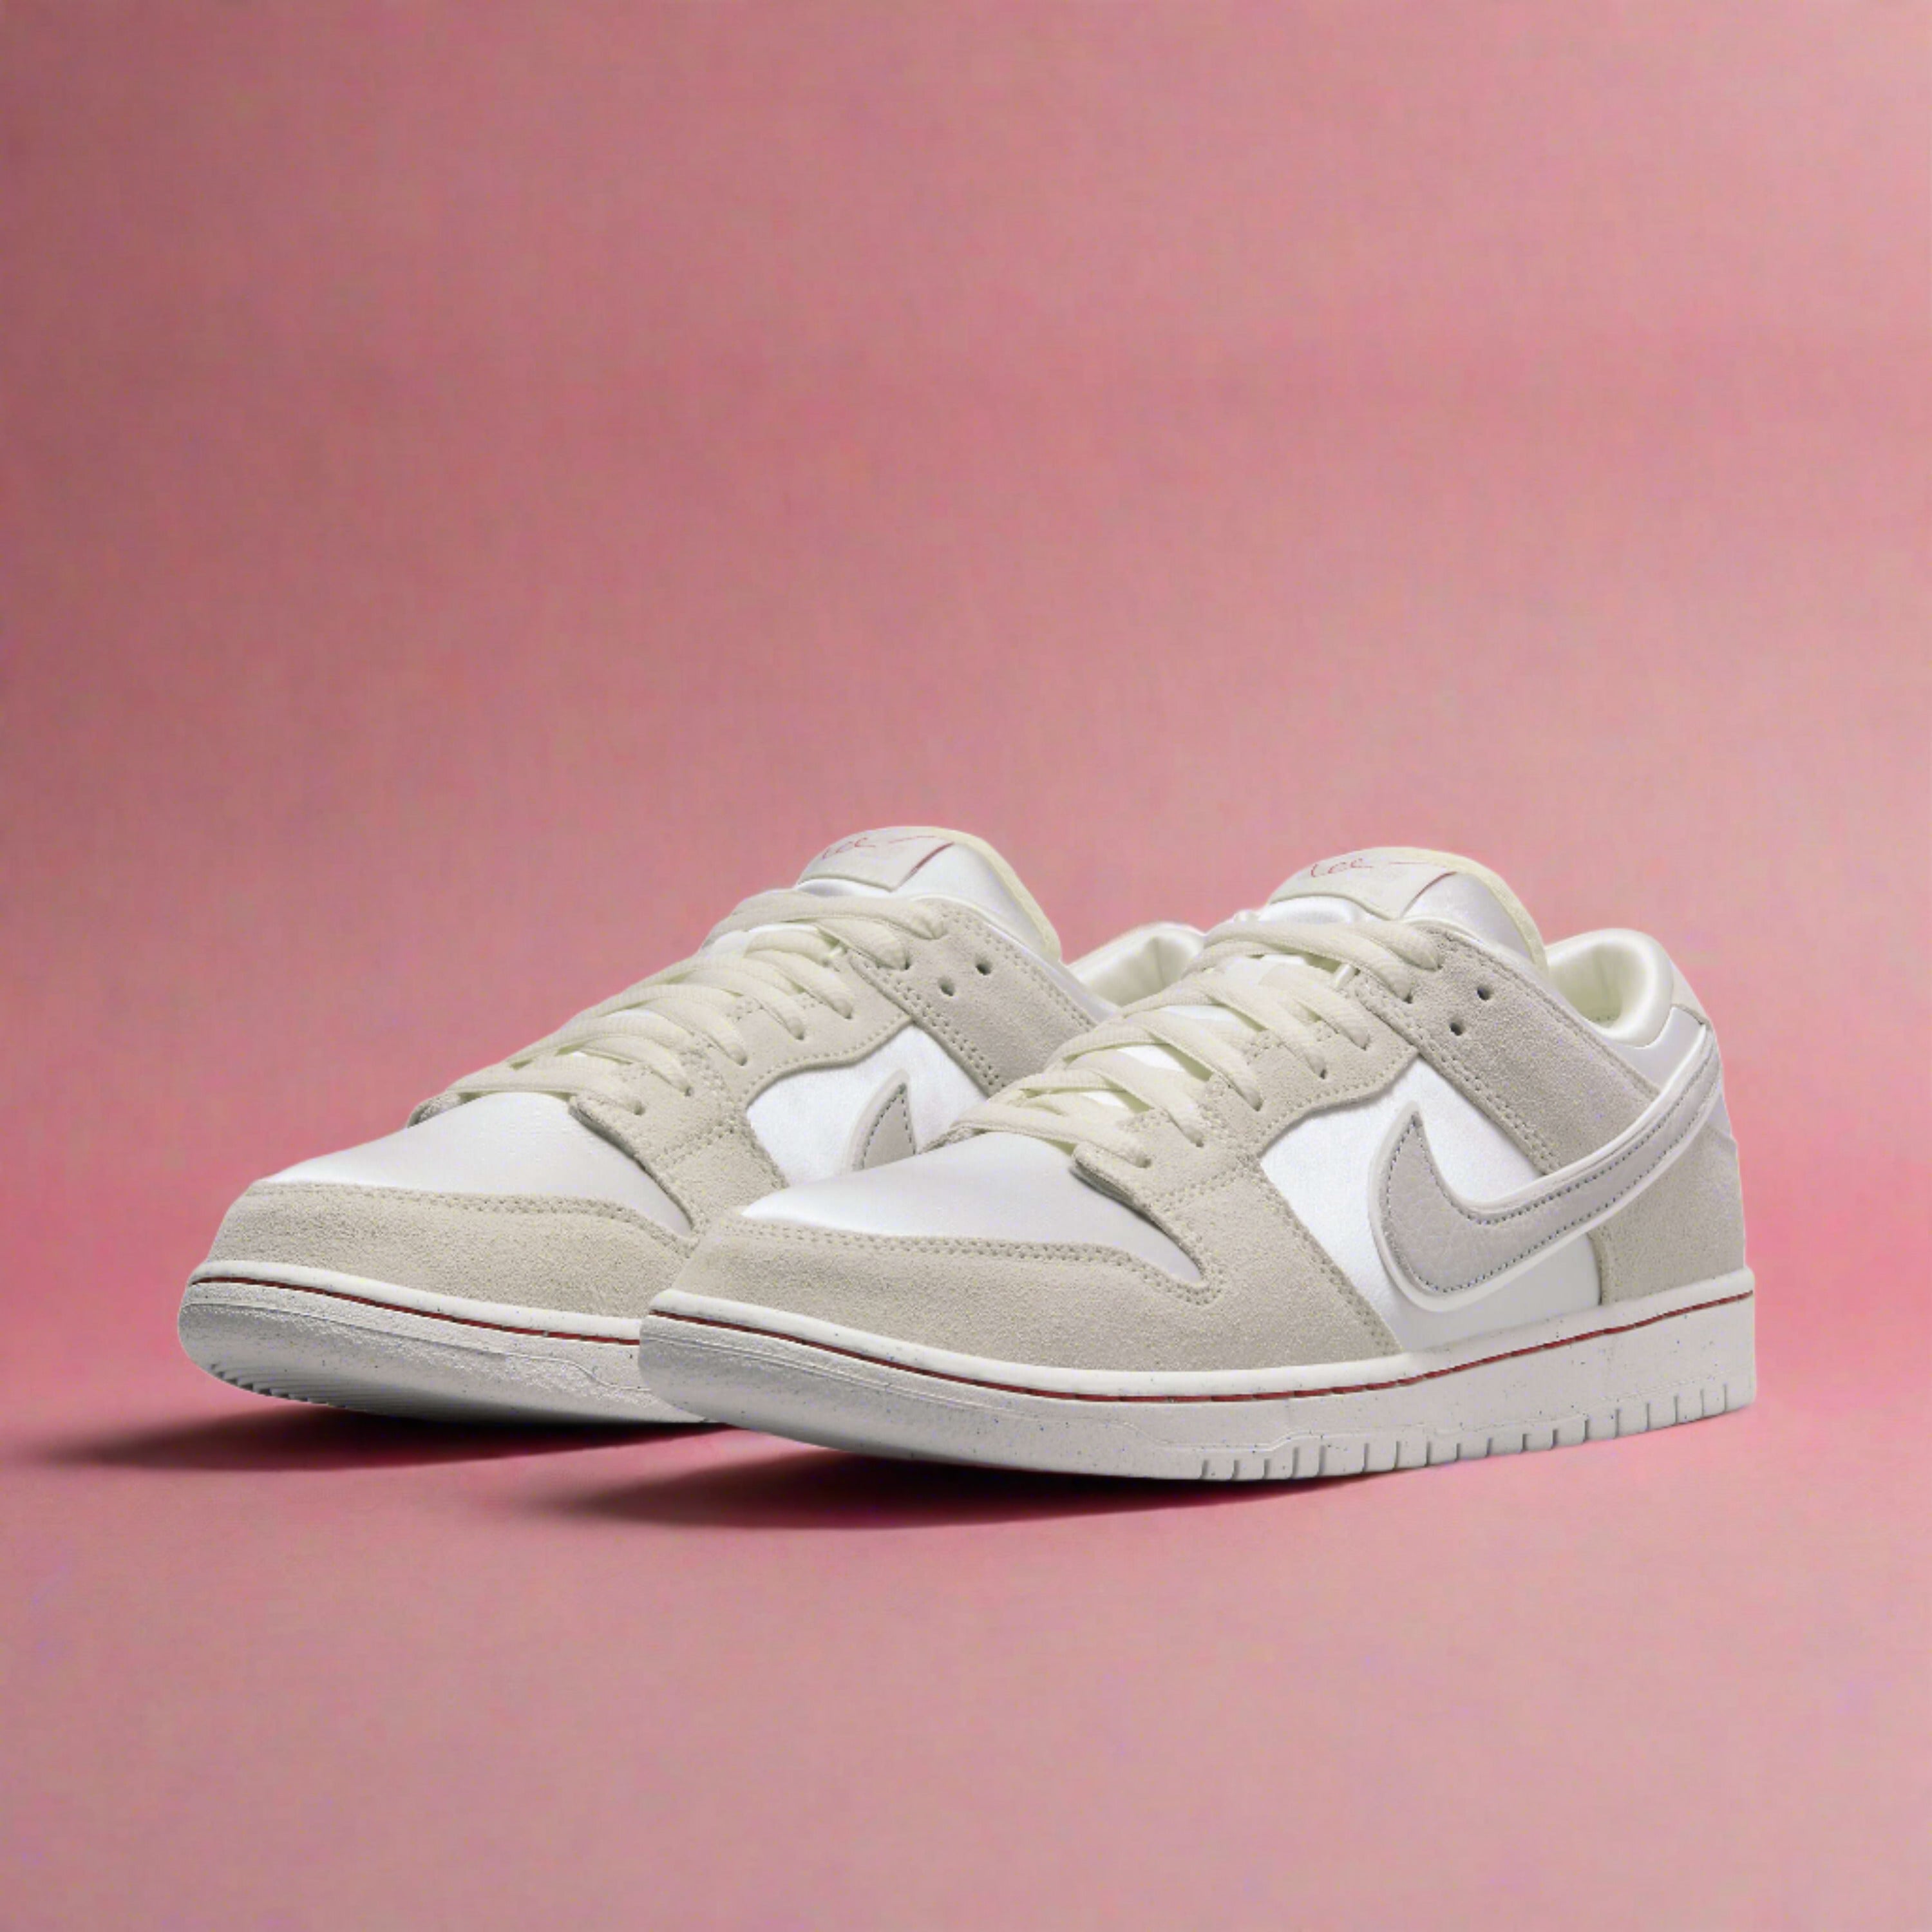 Nike SB Dunk Low ‘City of Love’ (White) | FZ5654-100 | $299.99 | Shoes | Marching Dogs